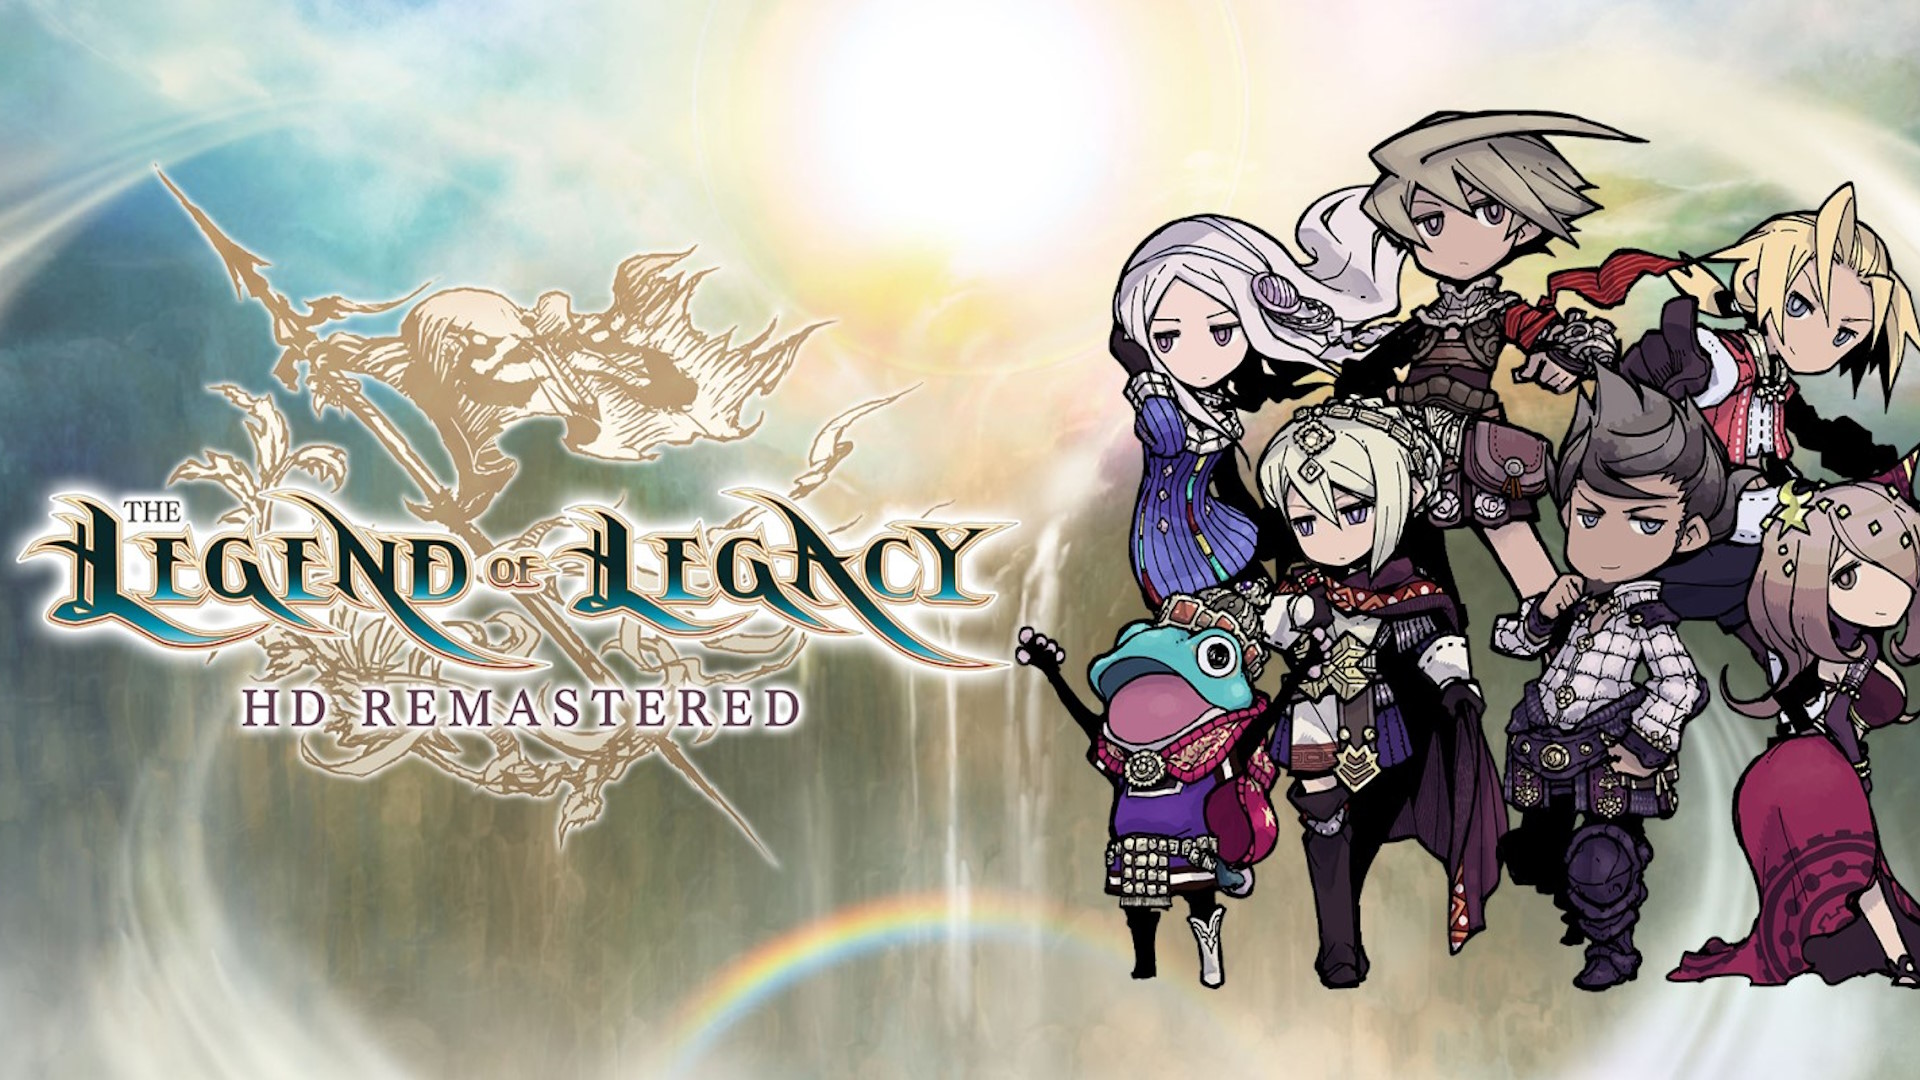  The Legend of Legacy HD Remastered Review